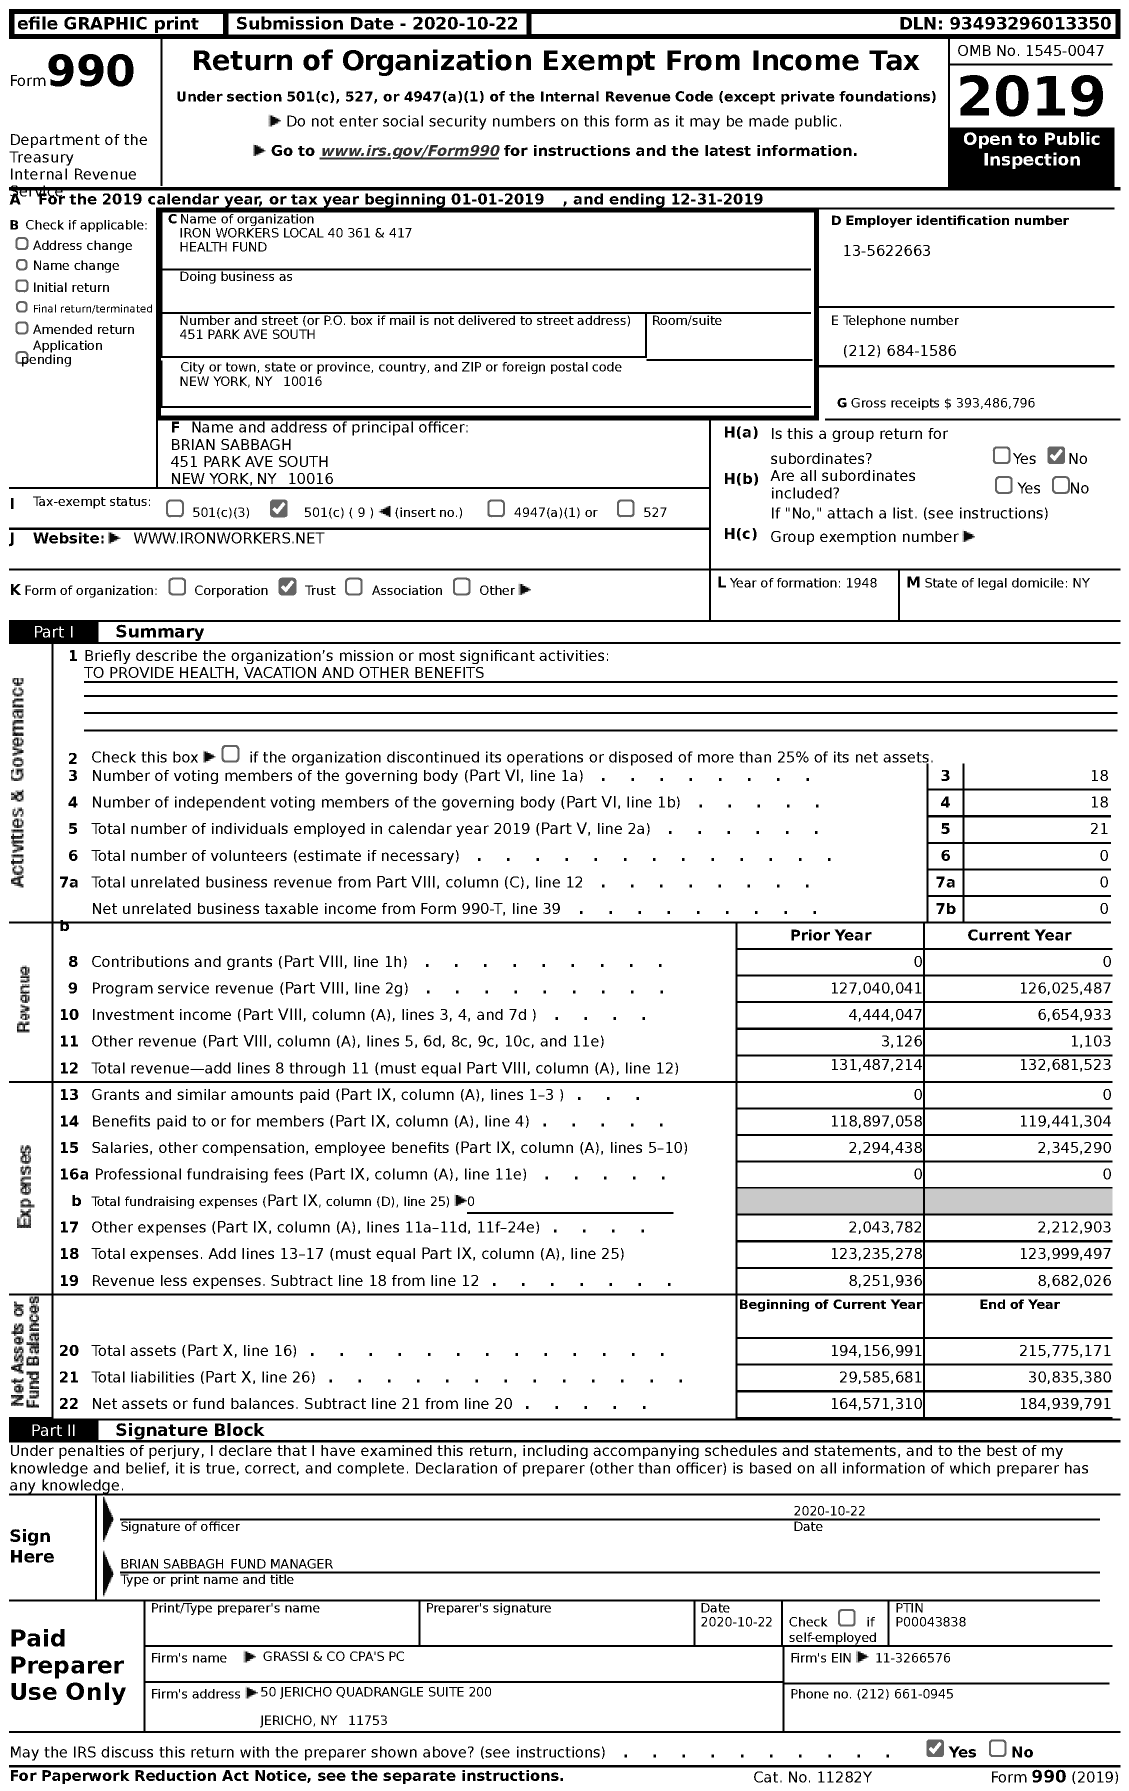 Image of first page of 2019 Form 990 for Iron Workers Local 40 361 and 417 Health